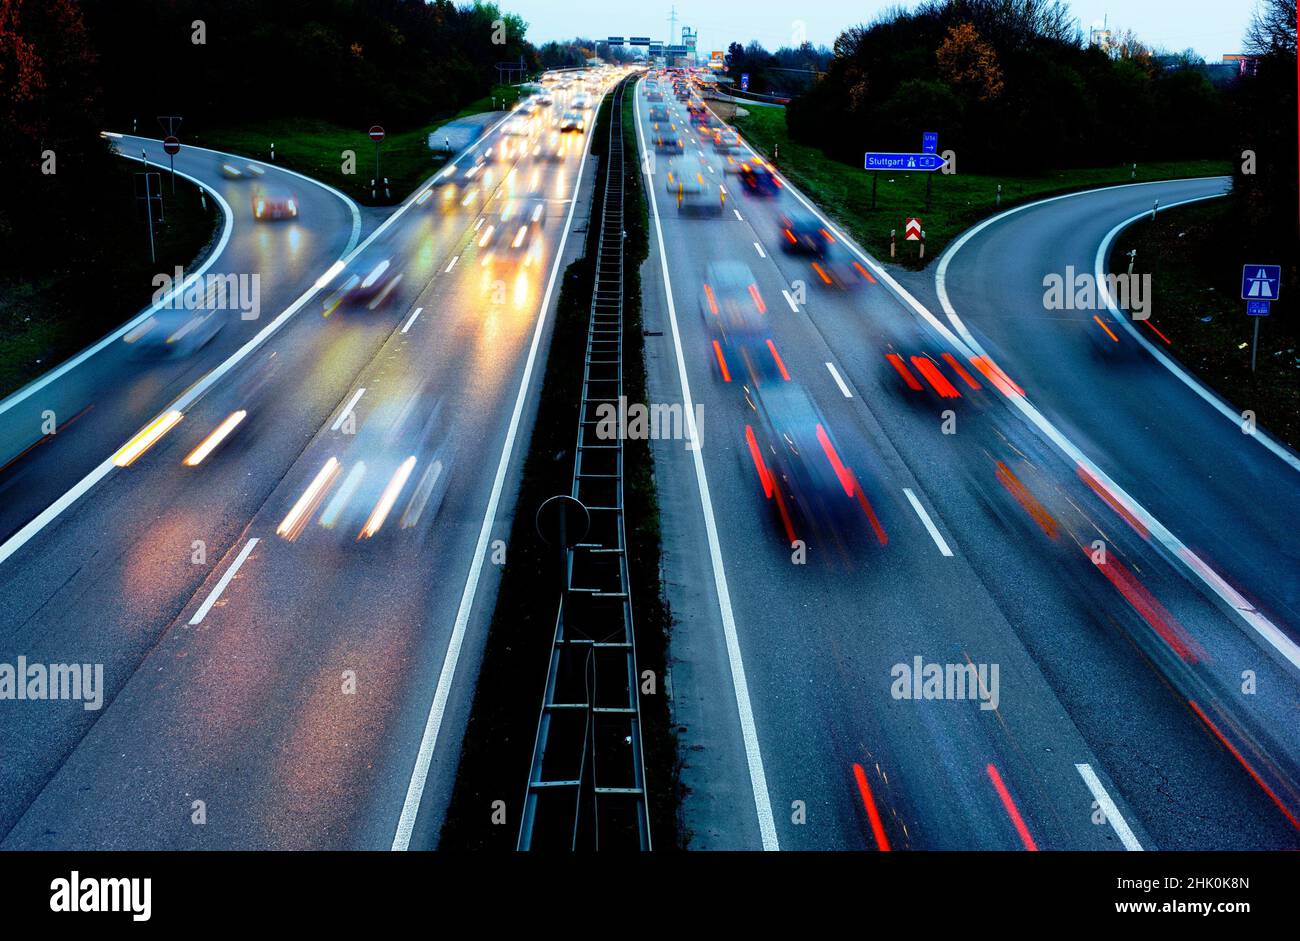 car traffic at night on the street. Stock Photo